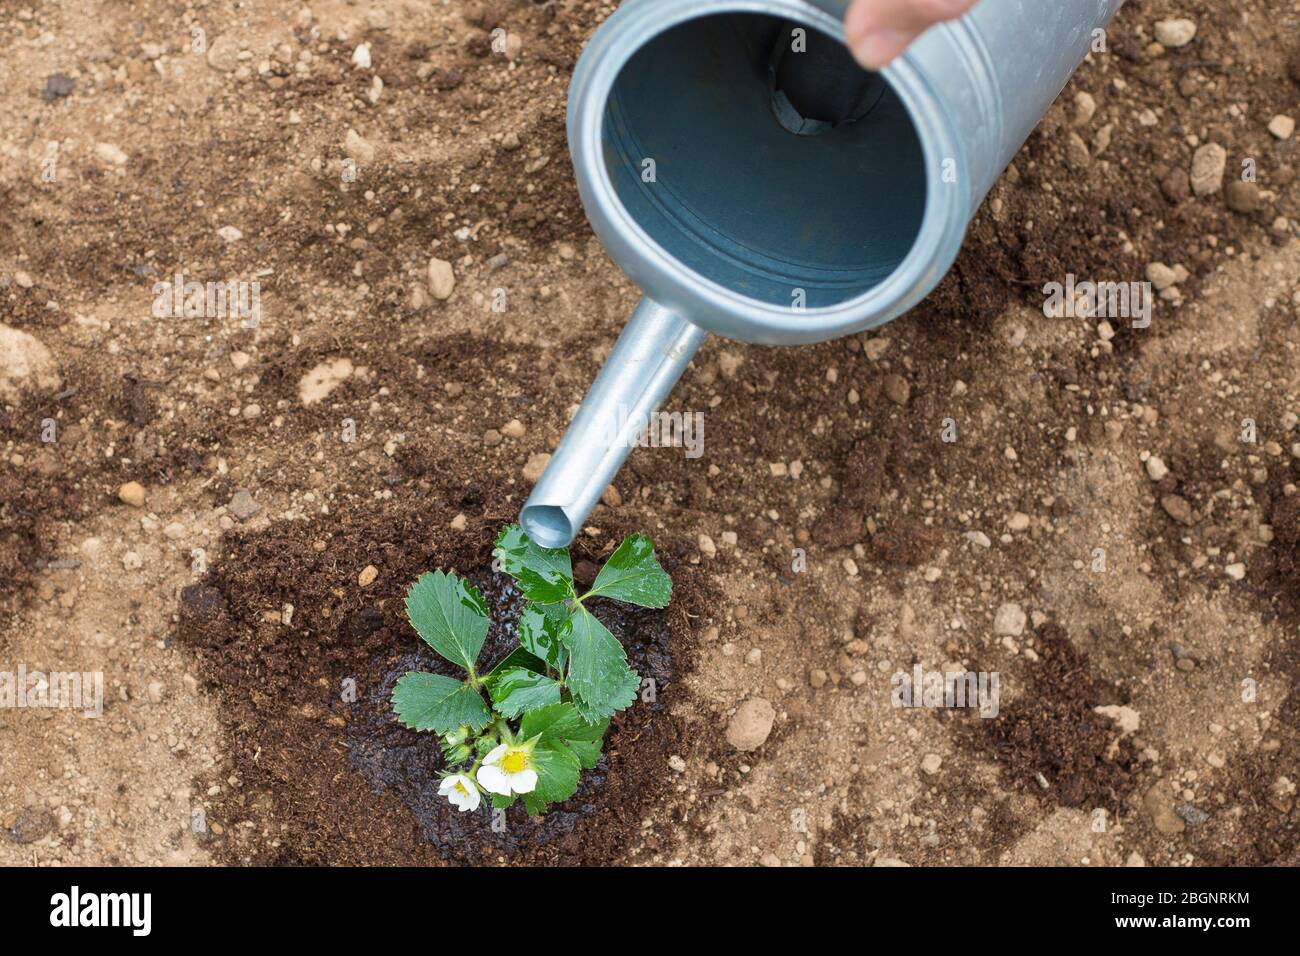 Hand using a tin watering can on a small strawberry plant. Self-growing fruits and plants in home garden is a good activity idea during covid-19 pande Stock Photo